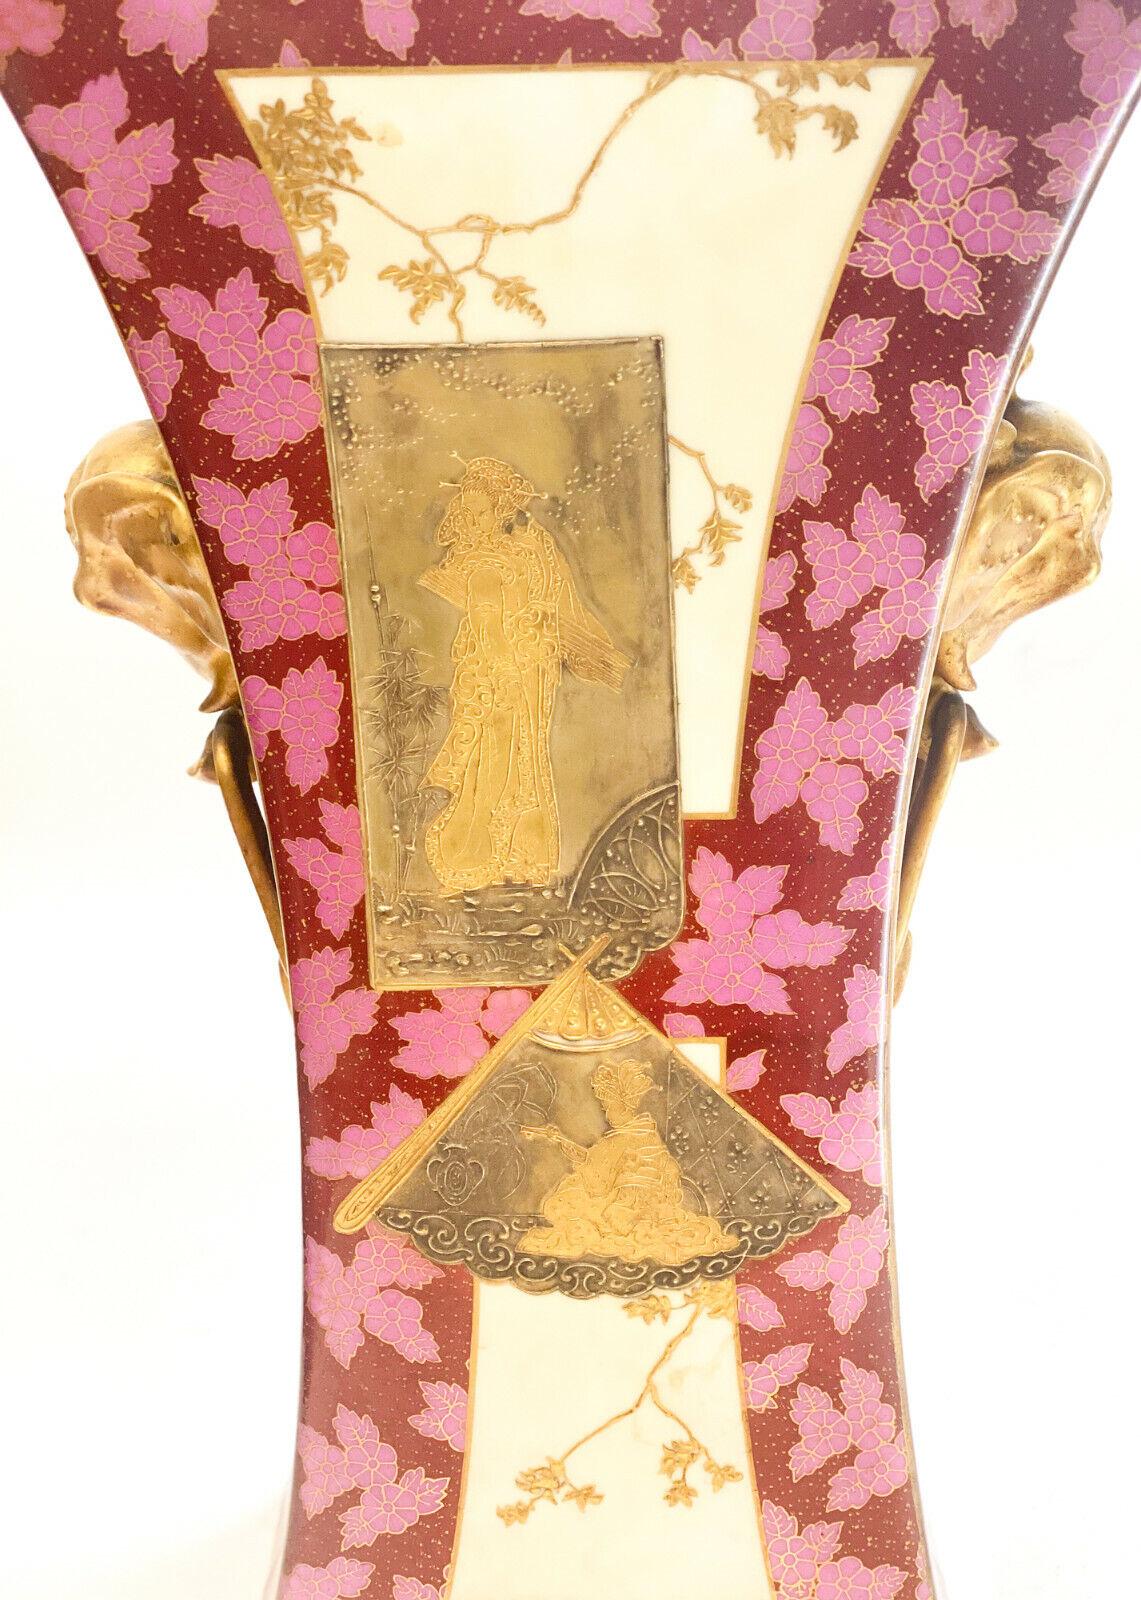 Continental Porcelain Japonism hand painted & gilt encrusted twin handle vase

Multi-colored raised gold decorated Japanese figures to the central area with leaf accents to the red and pink floral ground. Figural gilt elephant heads to the